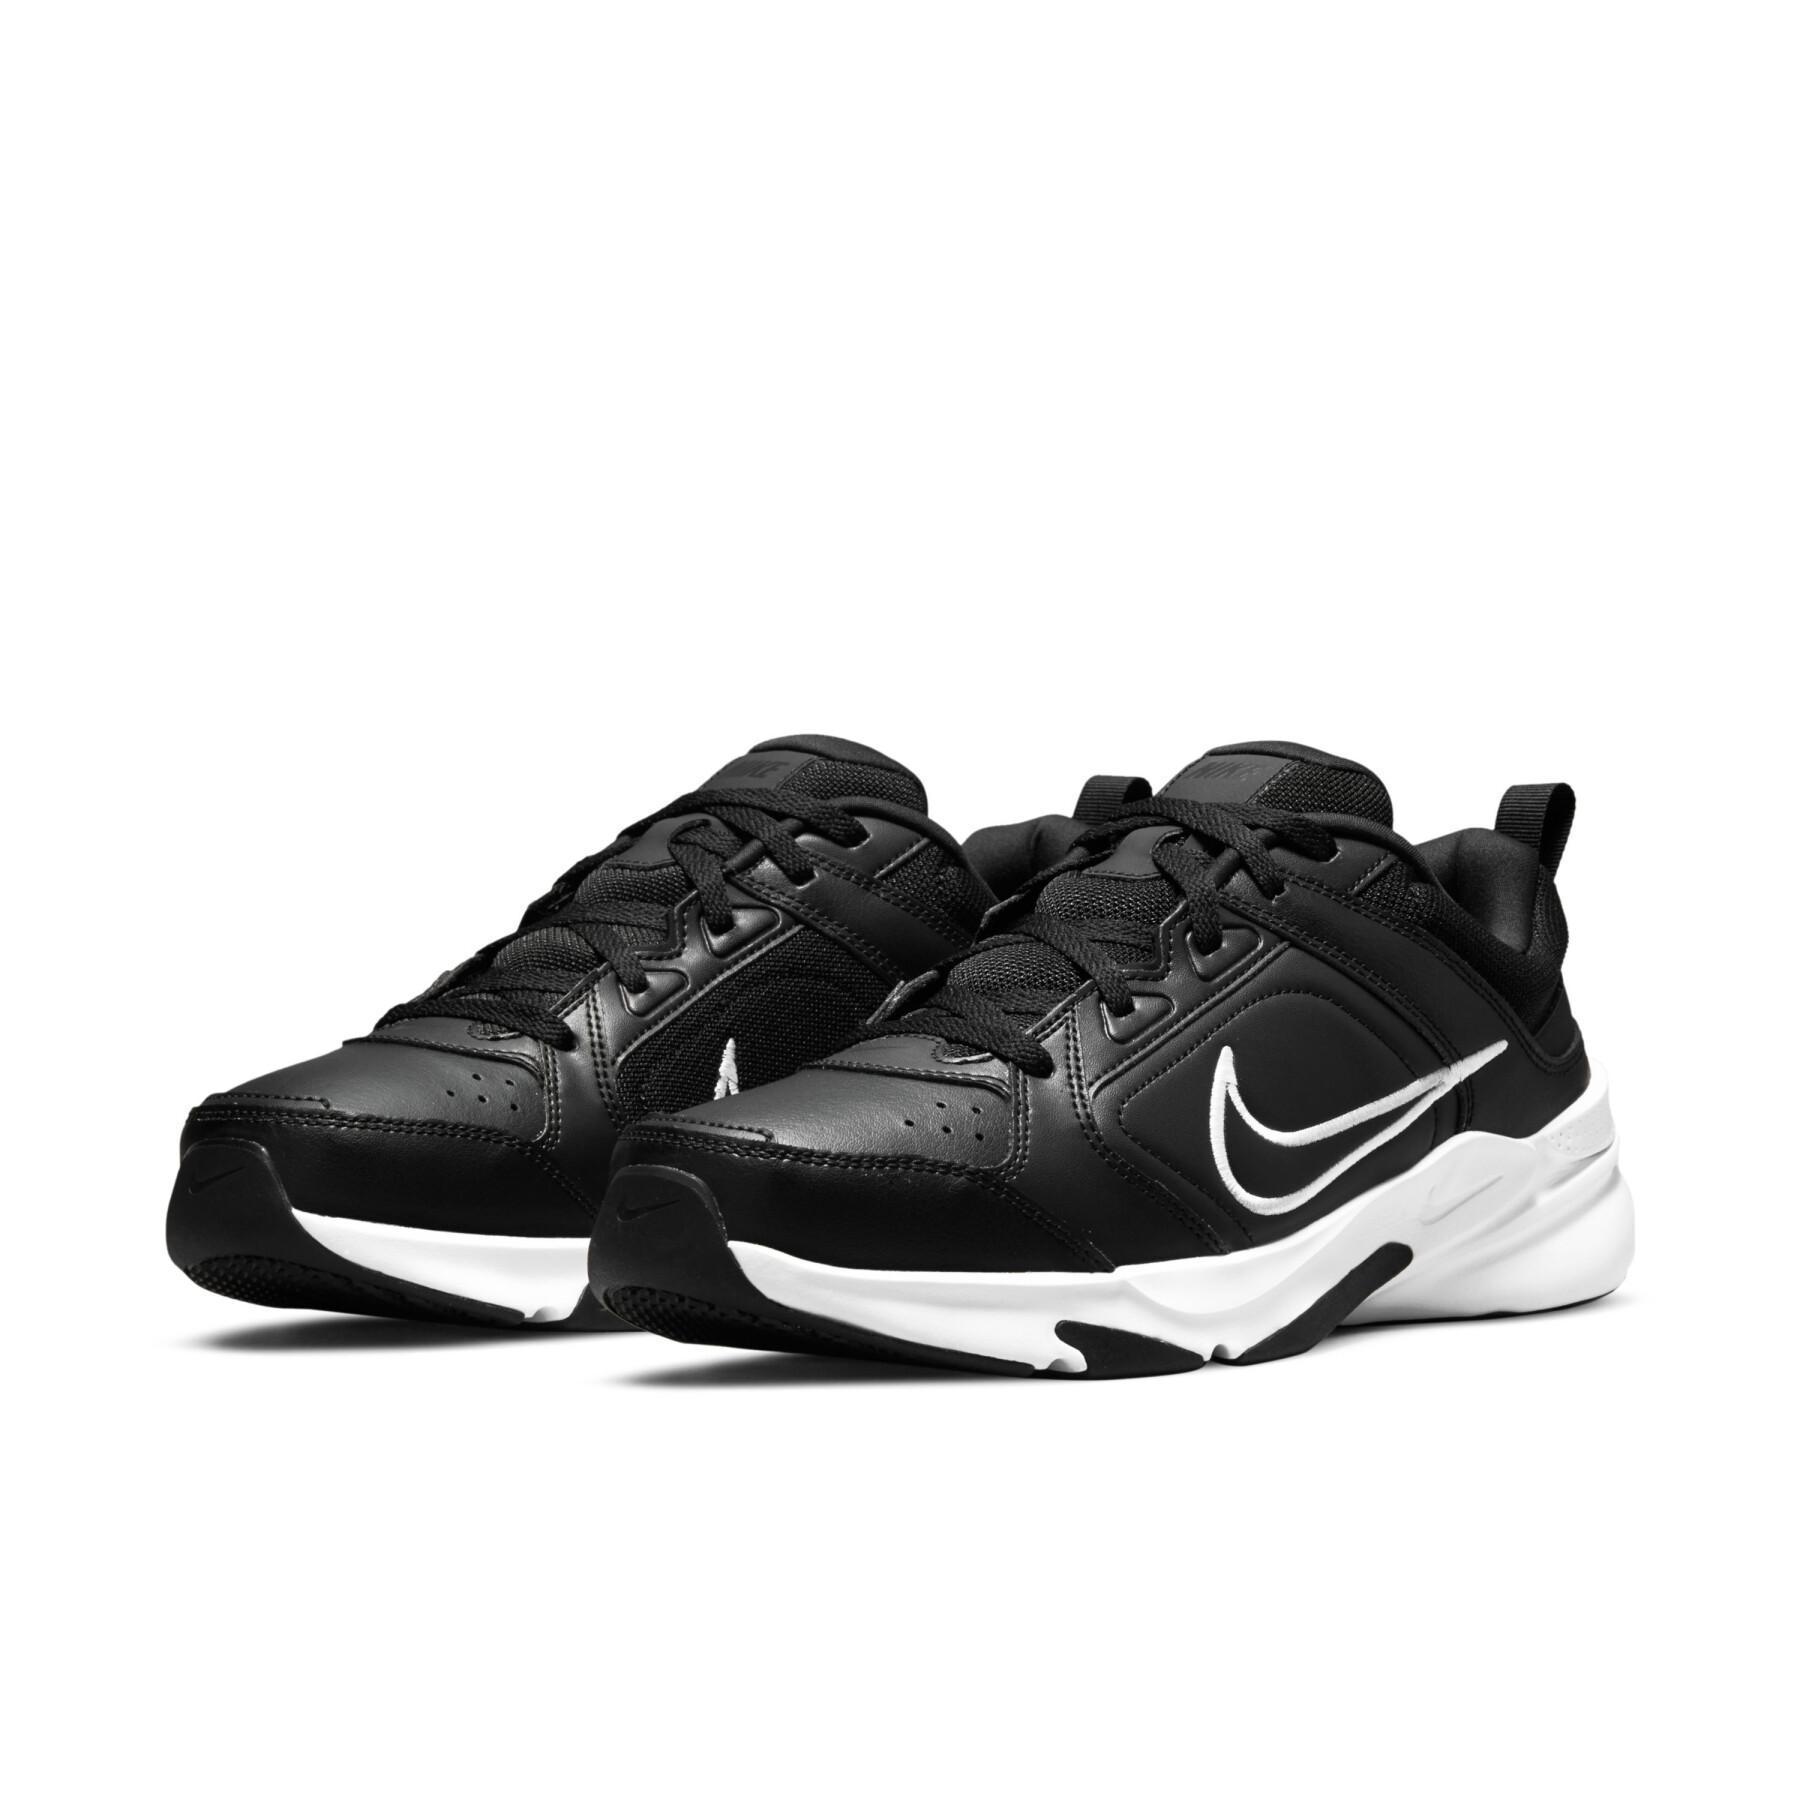 Cross training shoes Nike Defy All Day